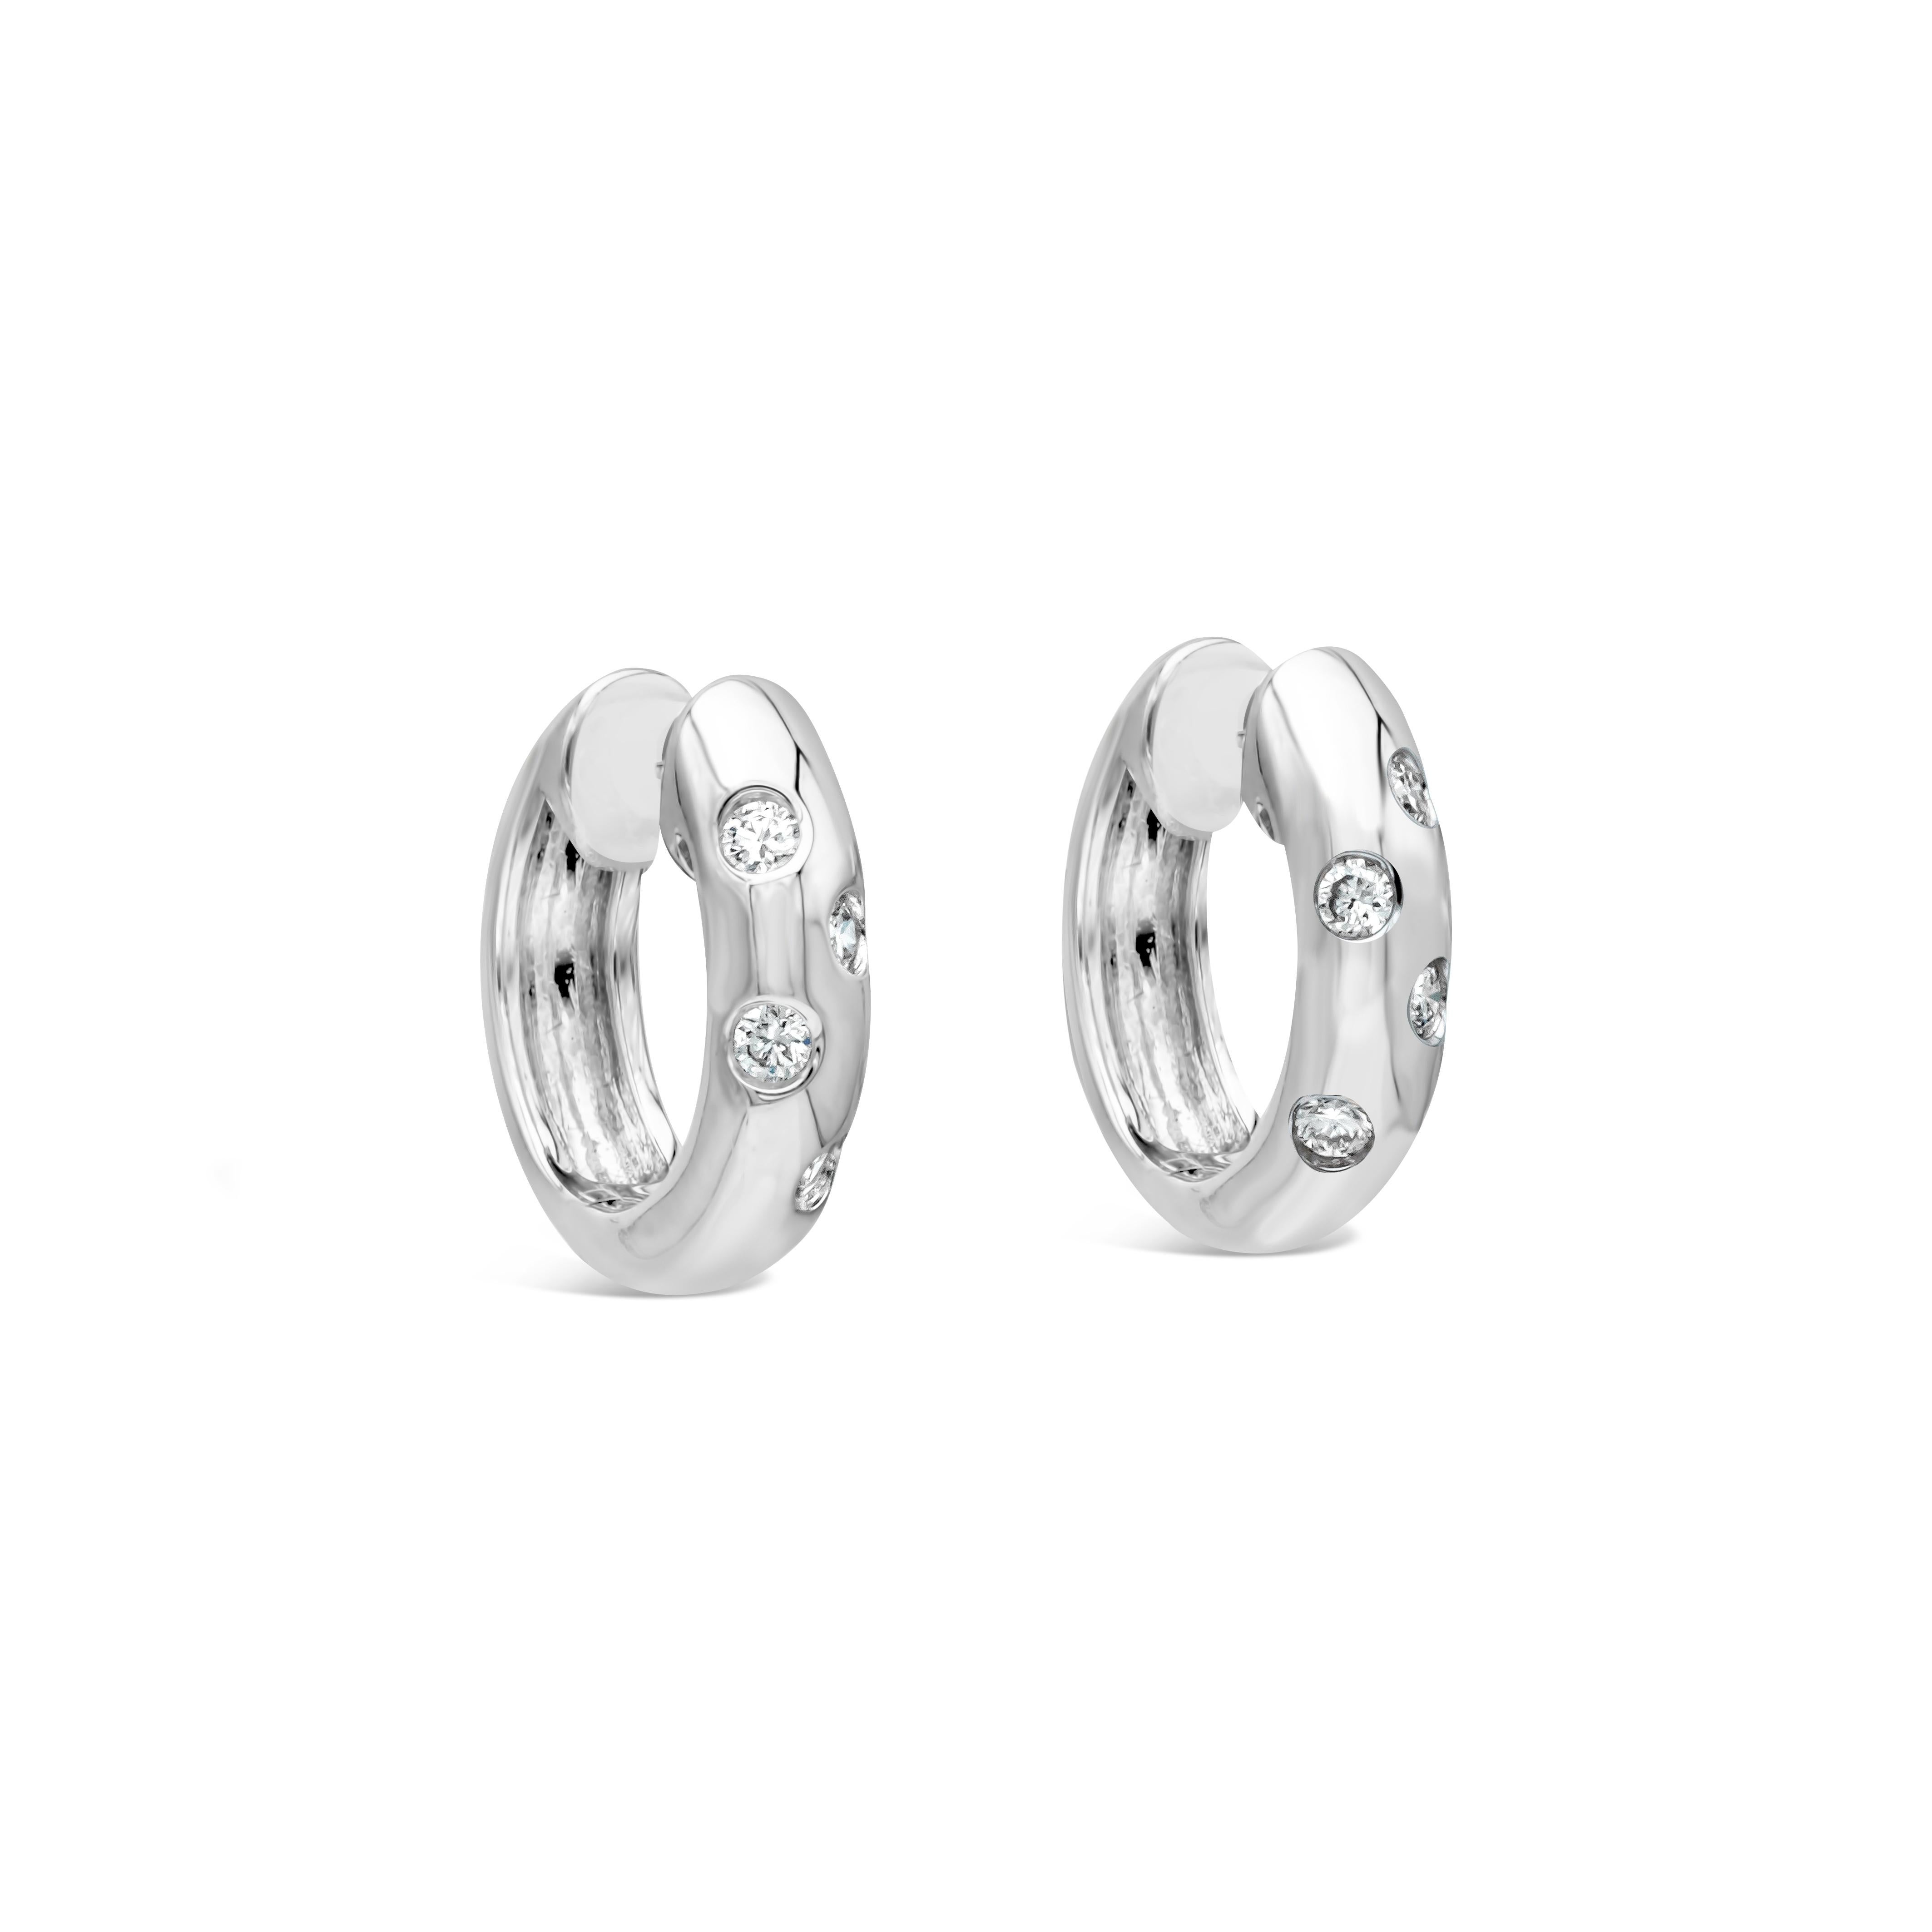 This pair of earrings shows 4 brilliant round diamonds scattered on each earring. Diamonds weigh 0.13 carats total. Aprroximately F-G color, VS-SI clarity. Made in 18k white gold.

Roman Malakov is a custom house, specializing in creating anything